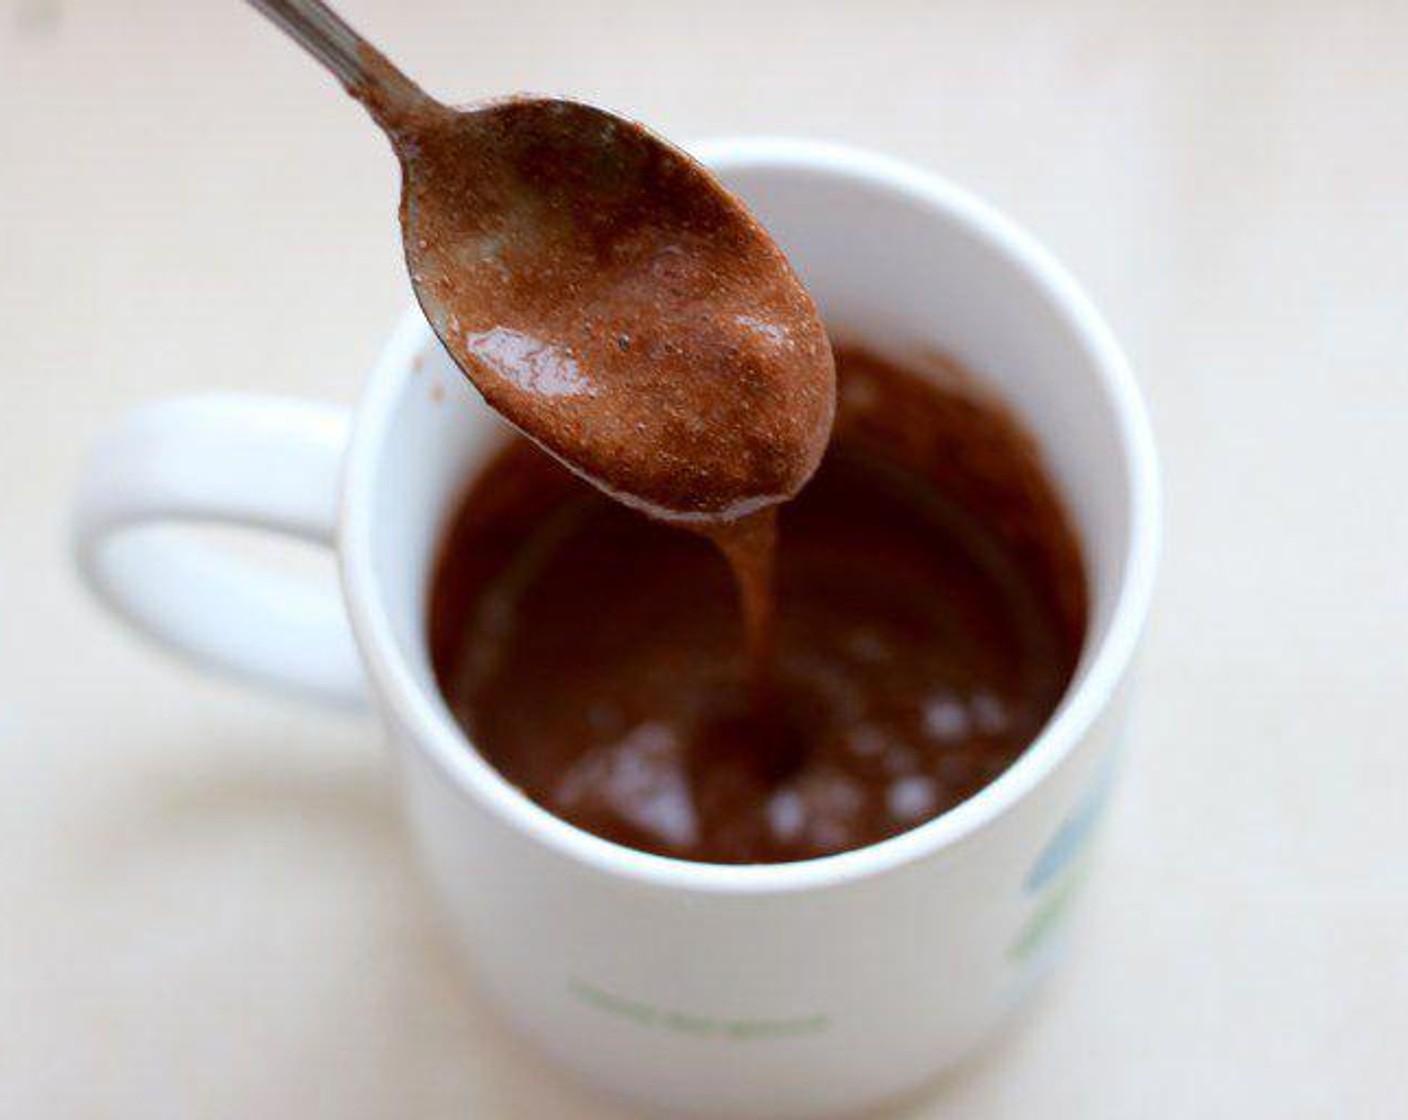 step 1 In your mug, mix Hot Chocolate Mix (1 pckg), Egg (1), Vanilla Extract (1 dash), Granulated Sugar (1 tsp) together and stir well.